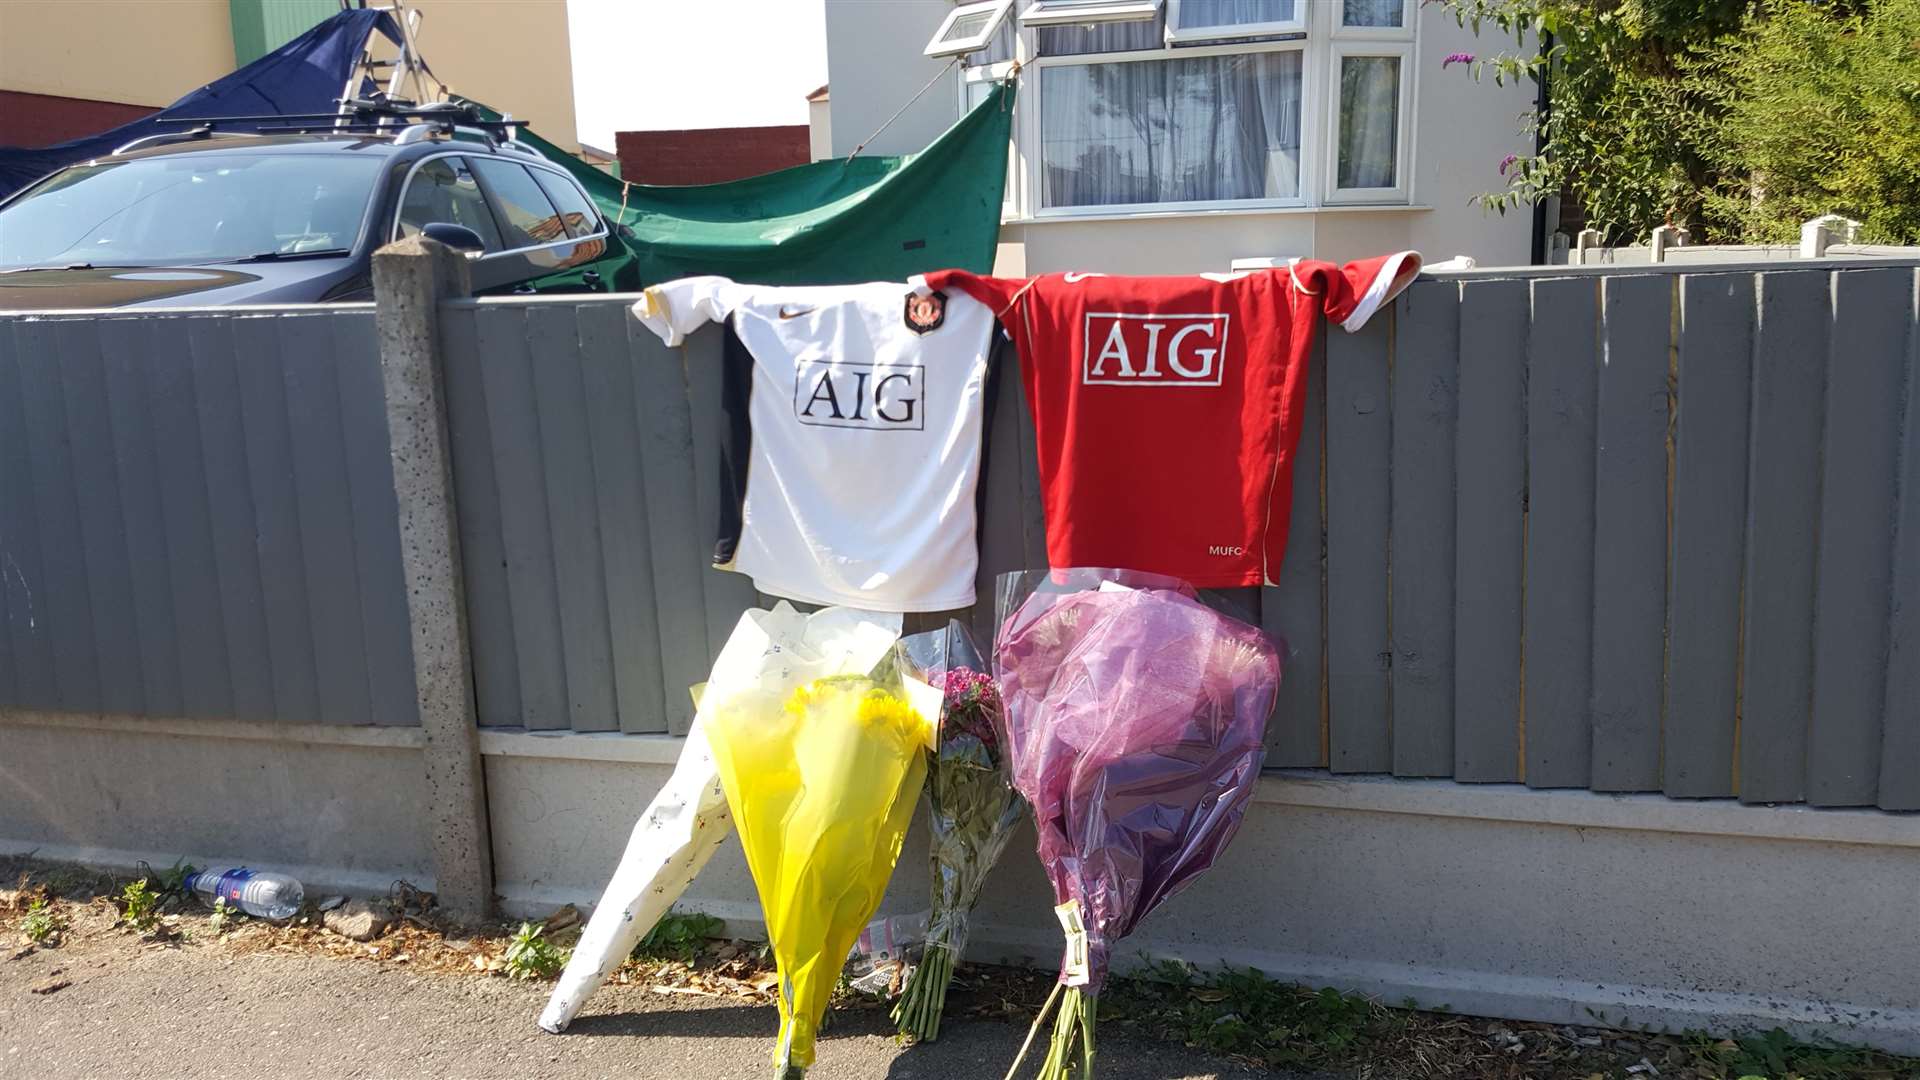 Football shirts and floral tributes were left outside a house